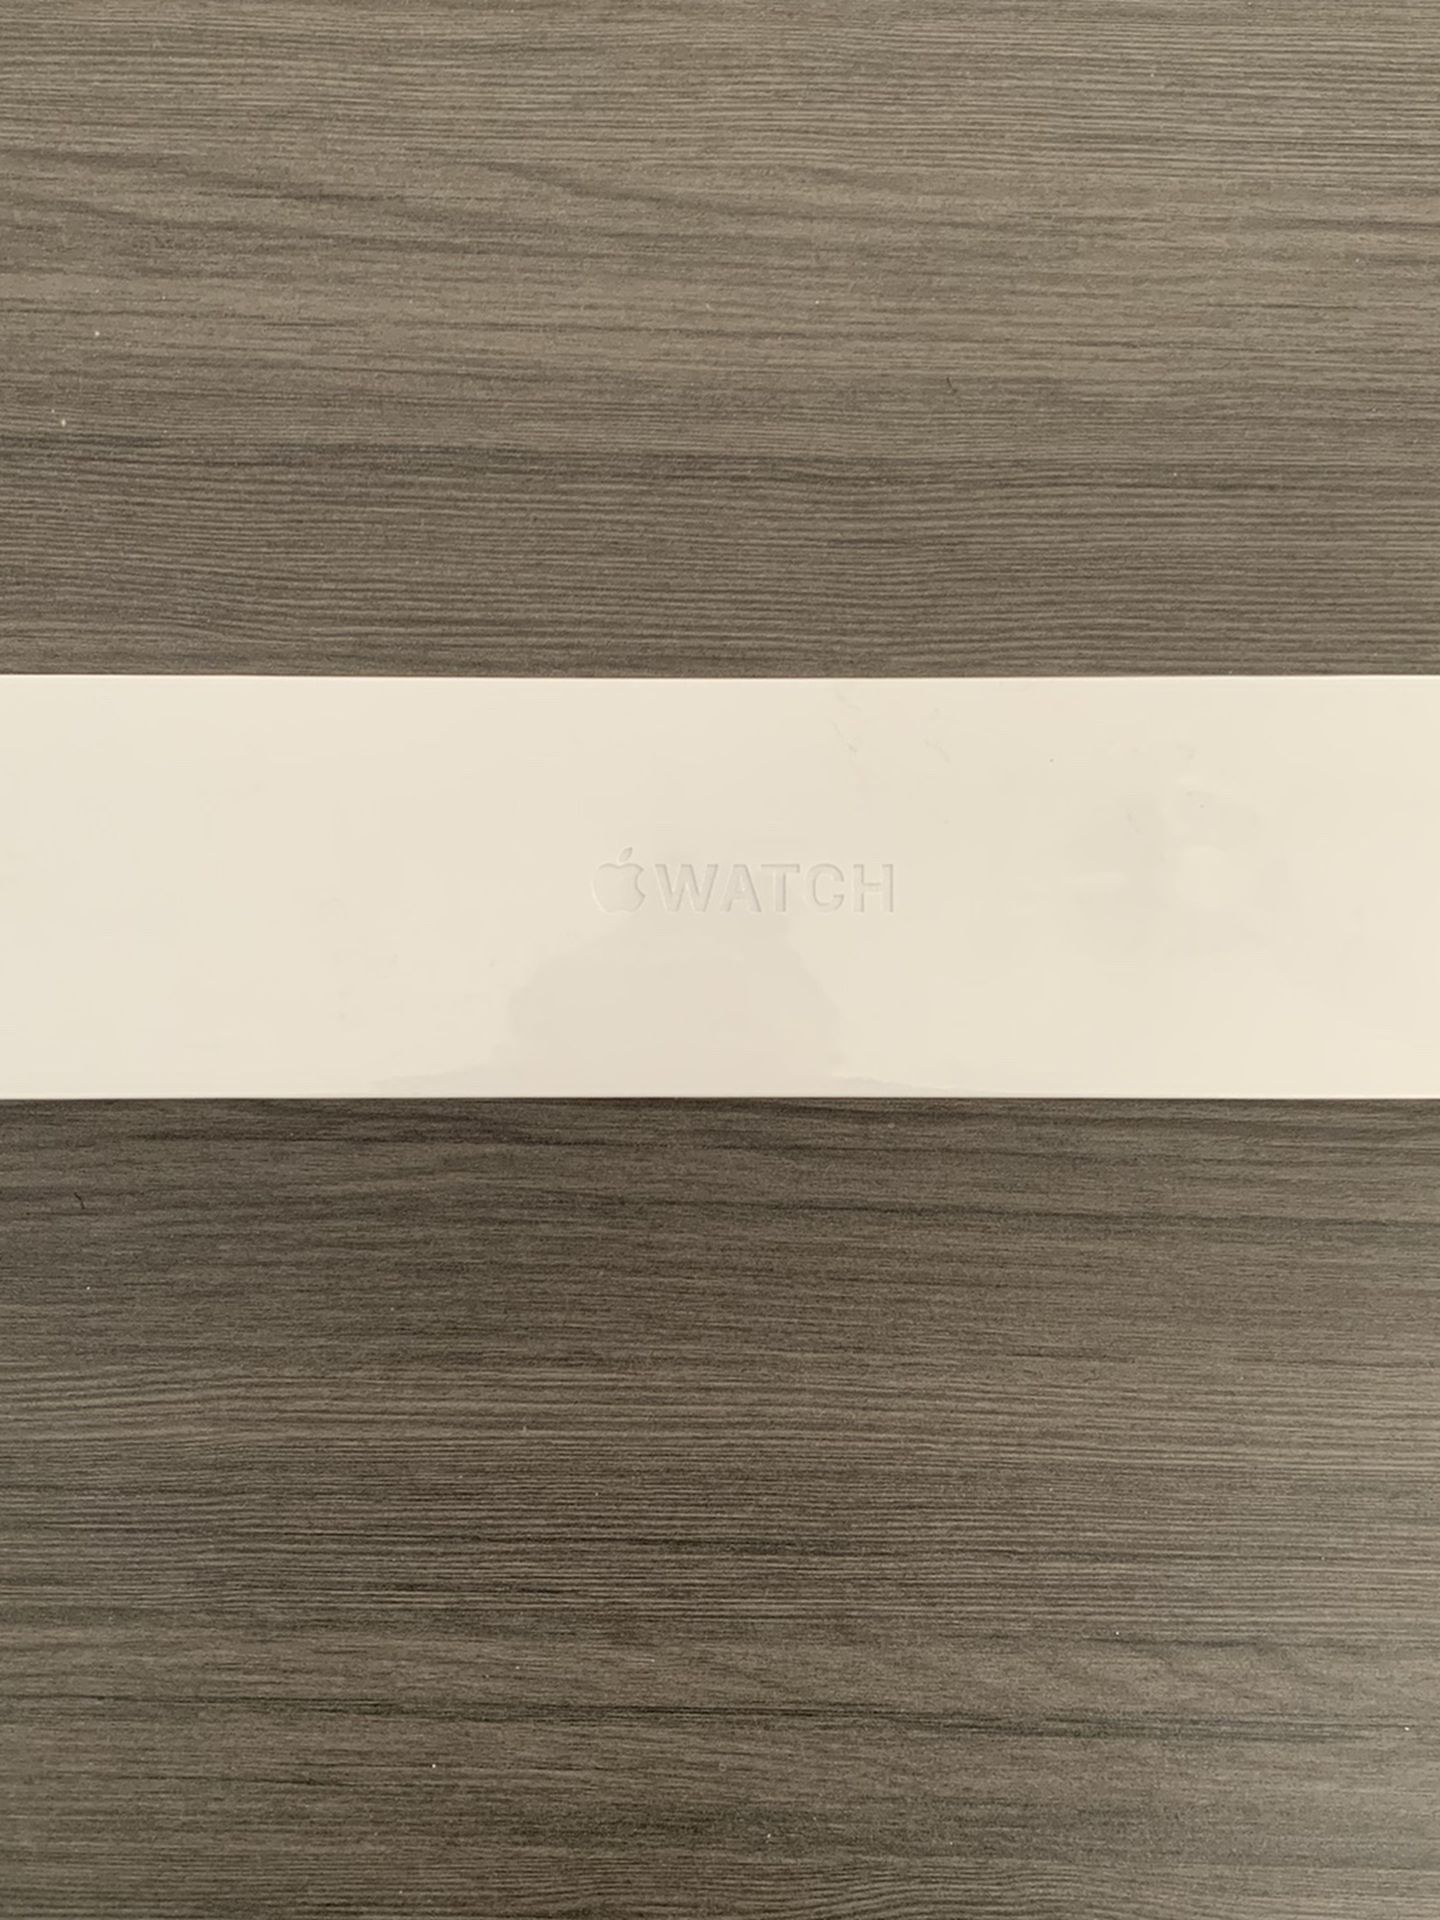 Apple Watch Series 6 Black 40mm With Cellular